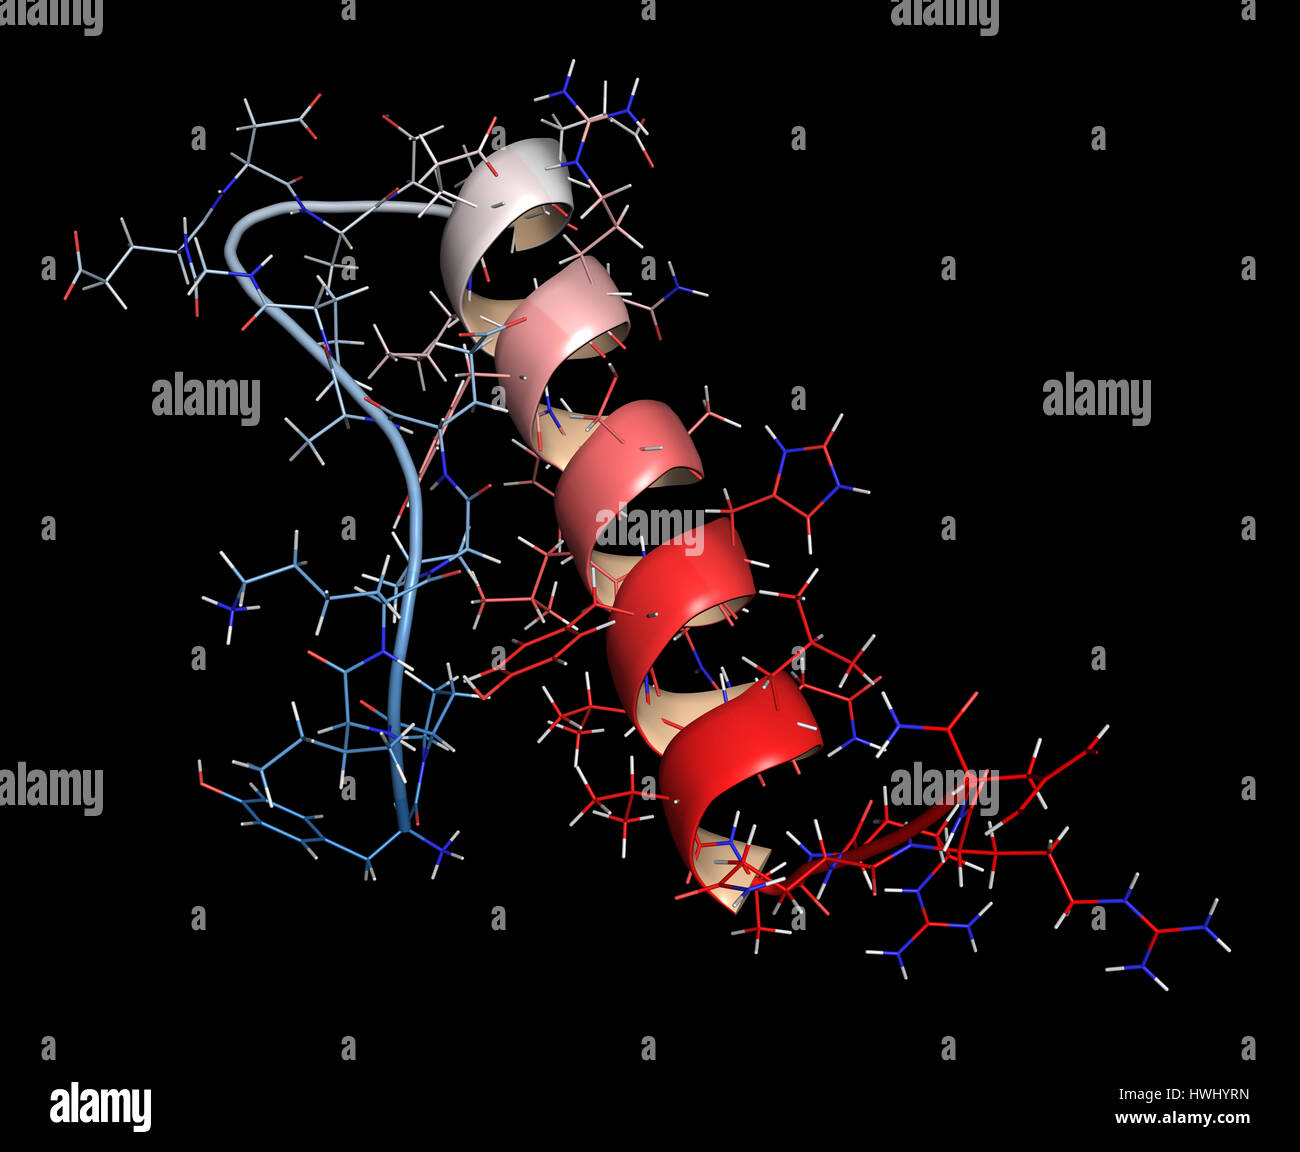 Peptide YY (PYY) appetite reducing polypeptide. Cartoon & stick representation with backbone gradient coloring. Stock Photo